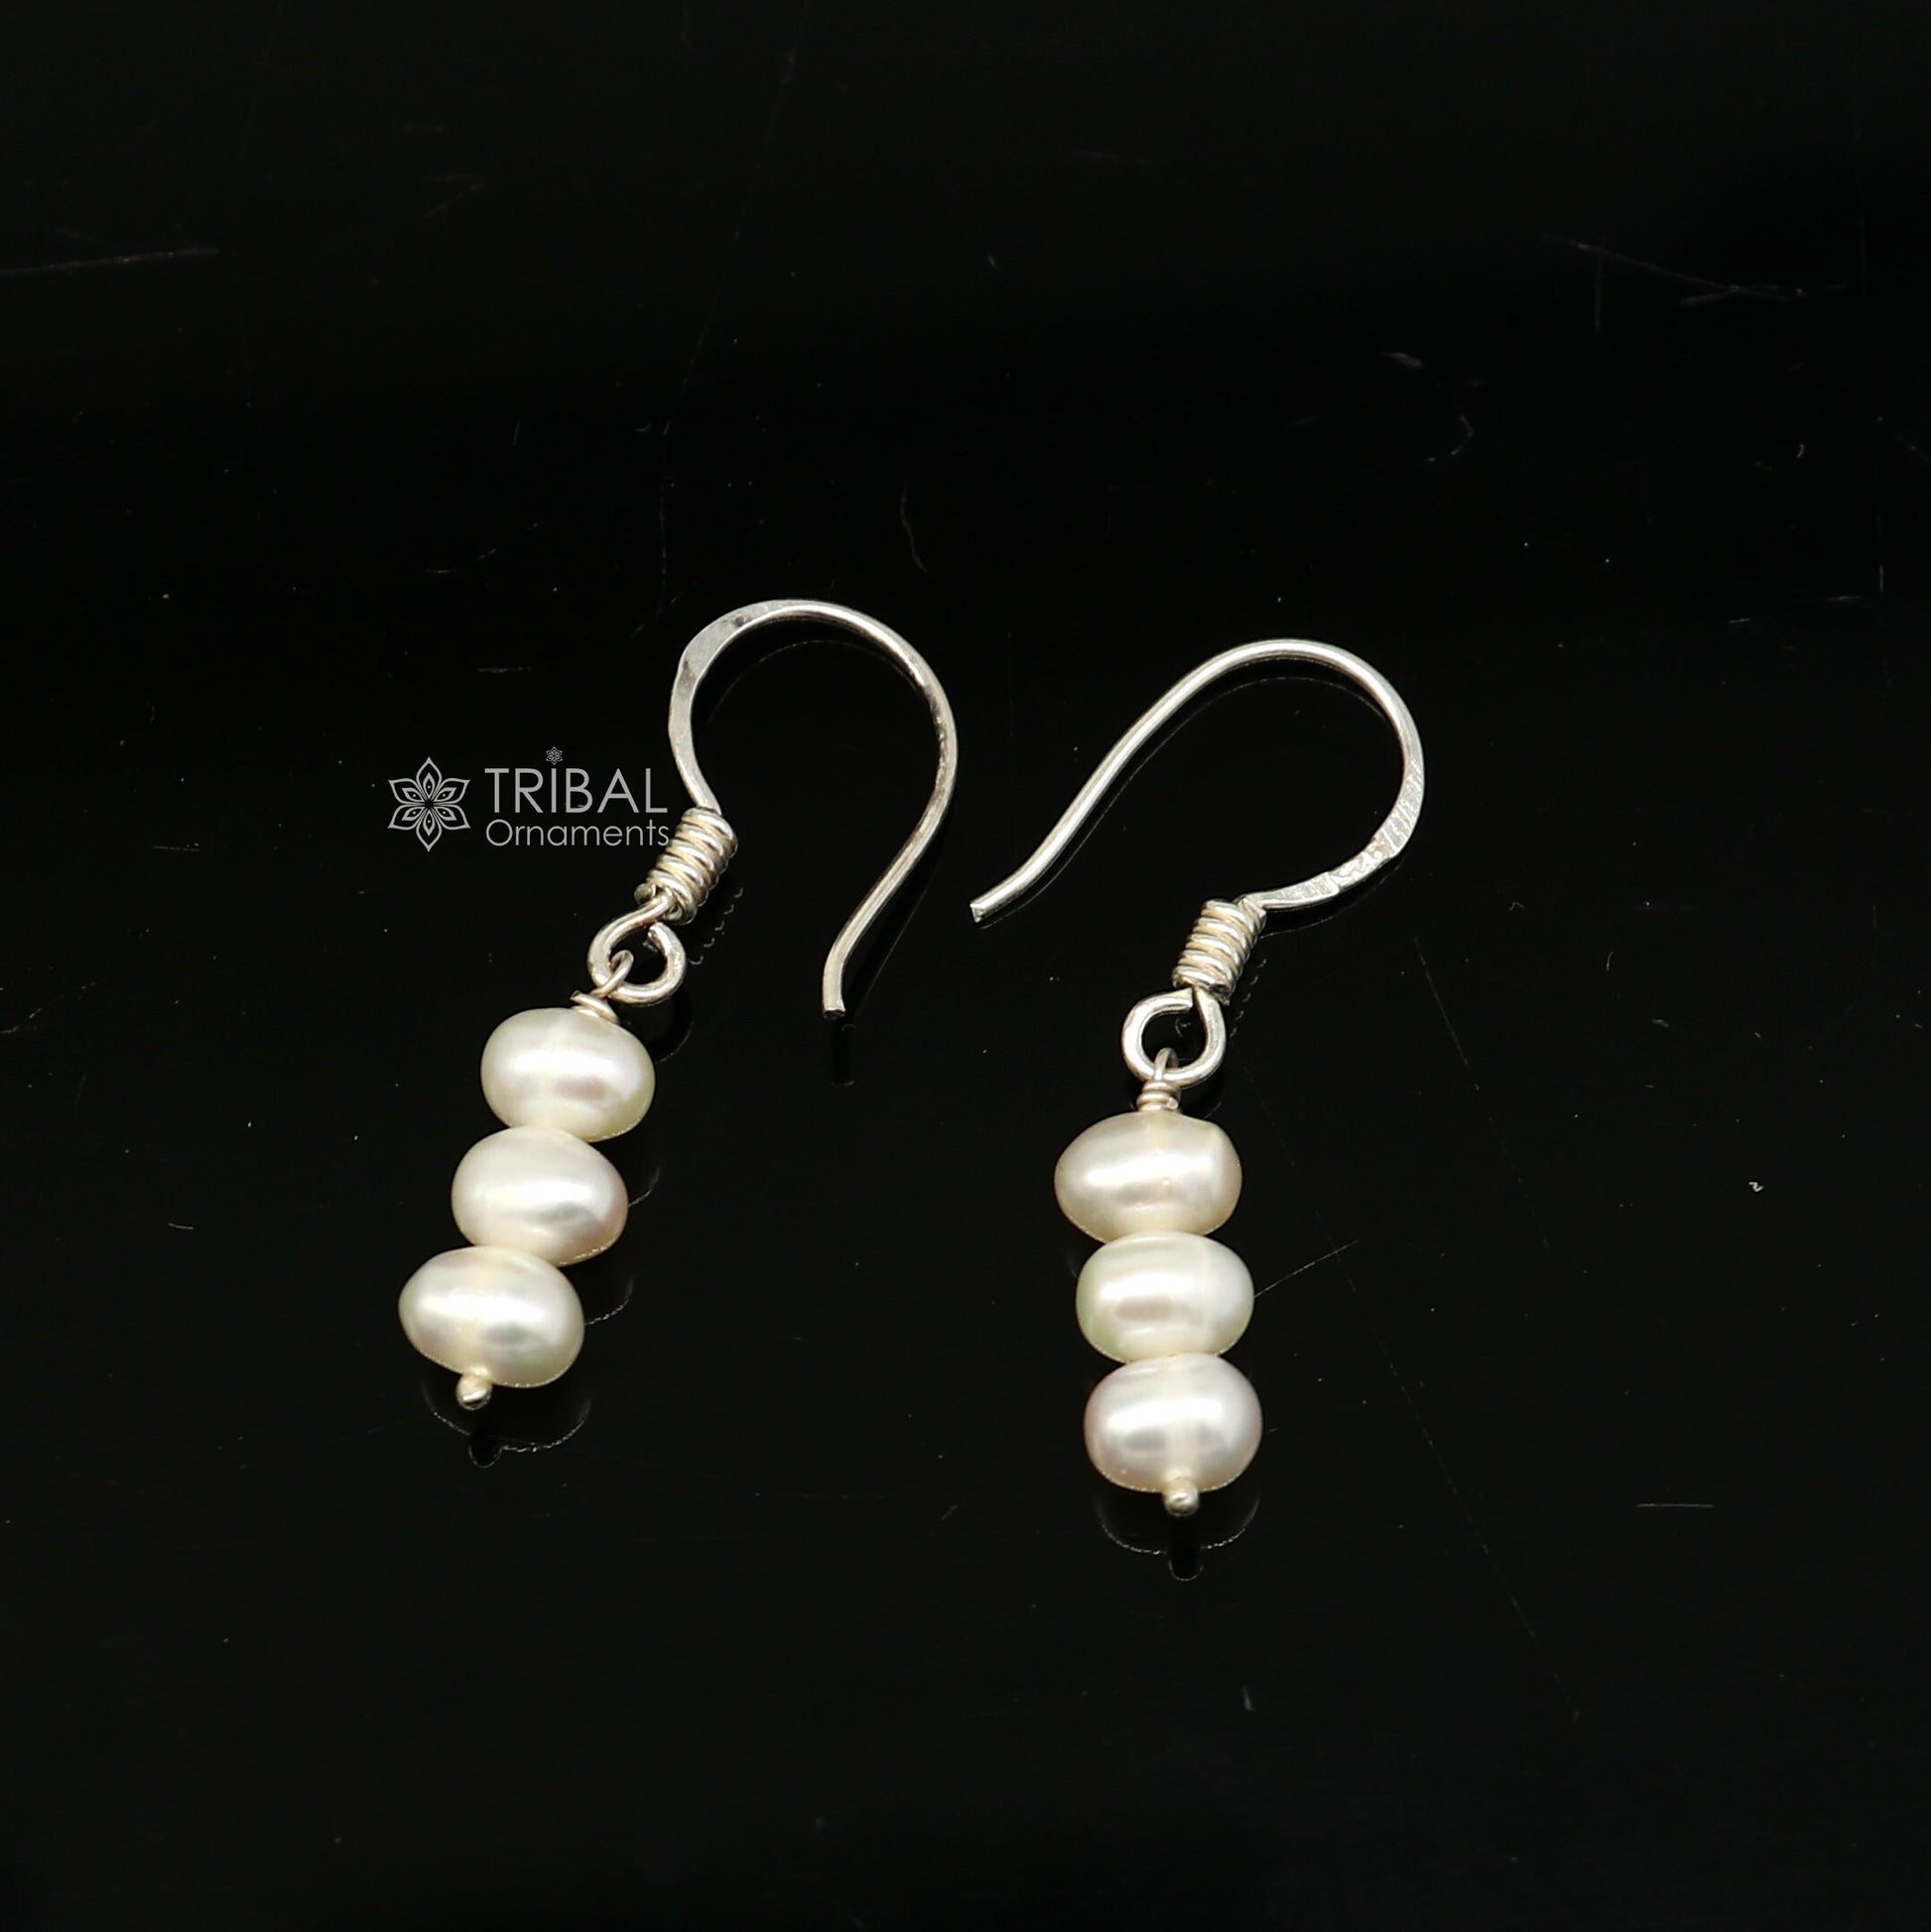 Unique 925 Sterling silver handmade fabulous Hoops earrings with gorgeous pearls stone stylish light weight delicate jewelry  s1208 - TRIBAL ORNAMENTS